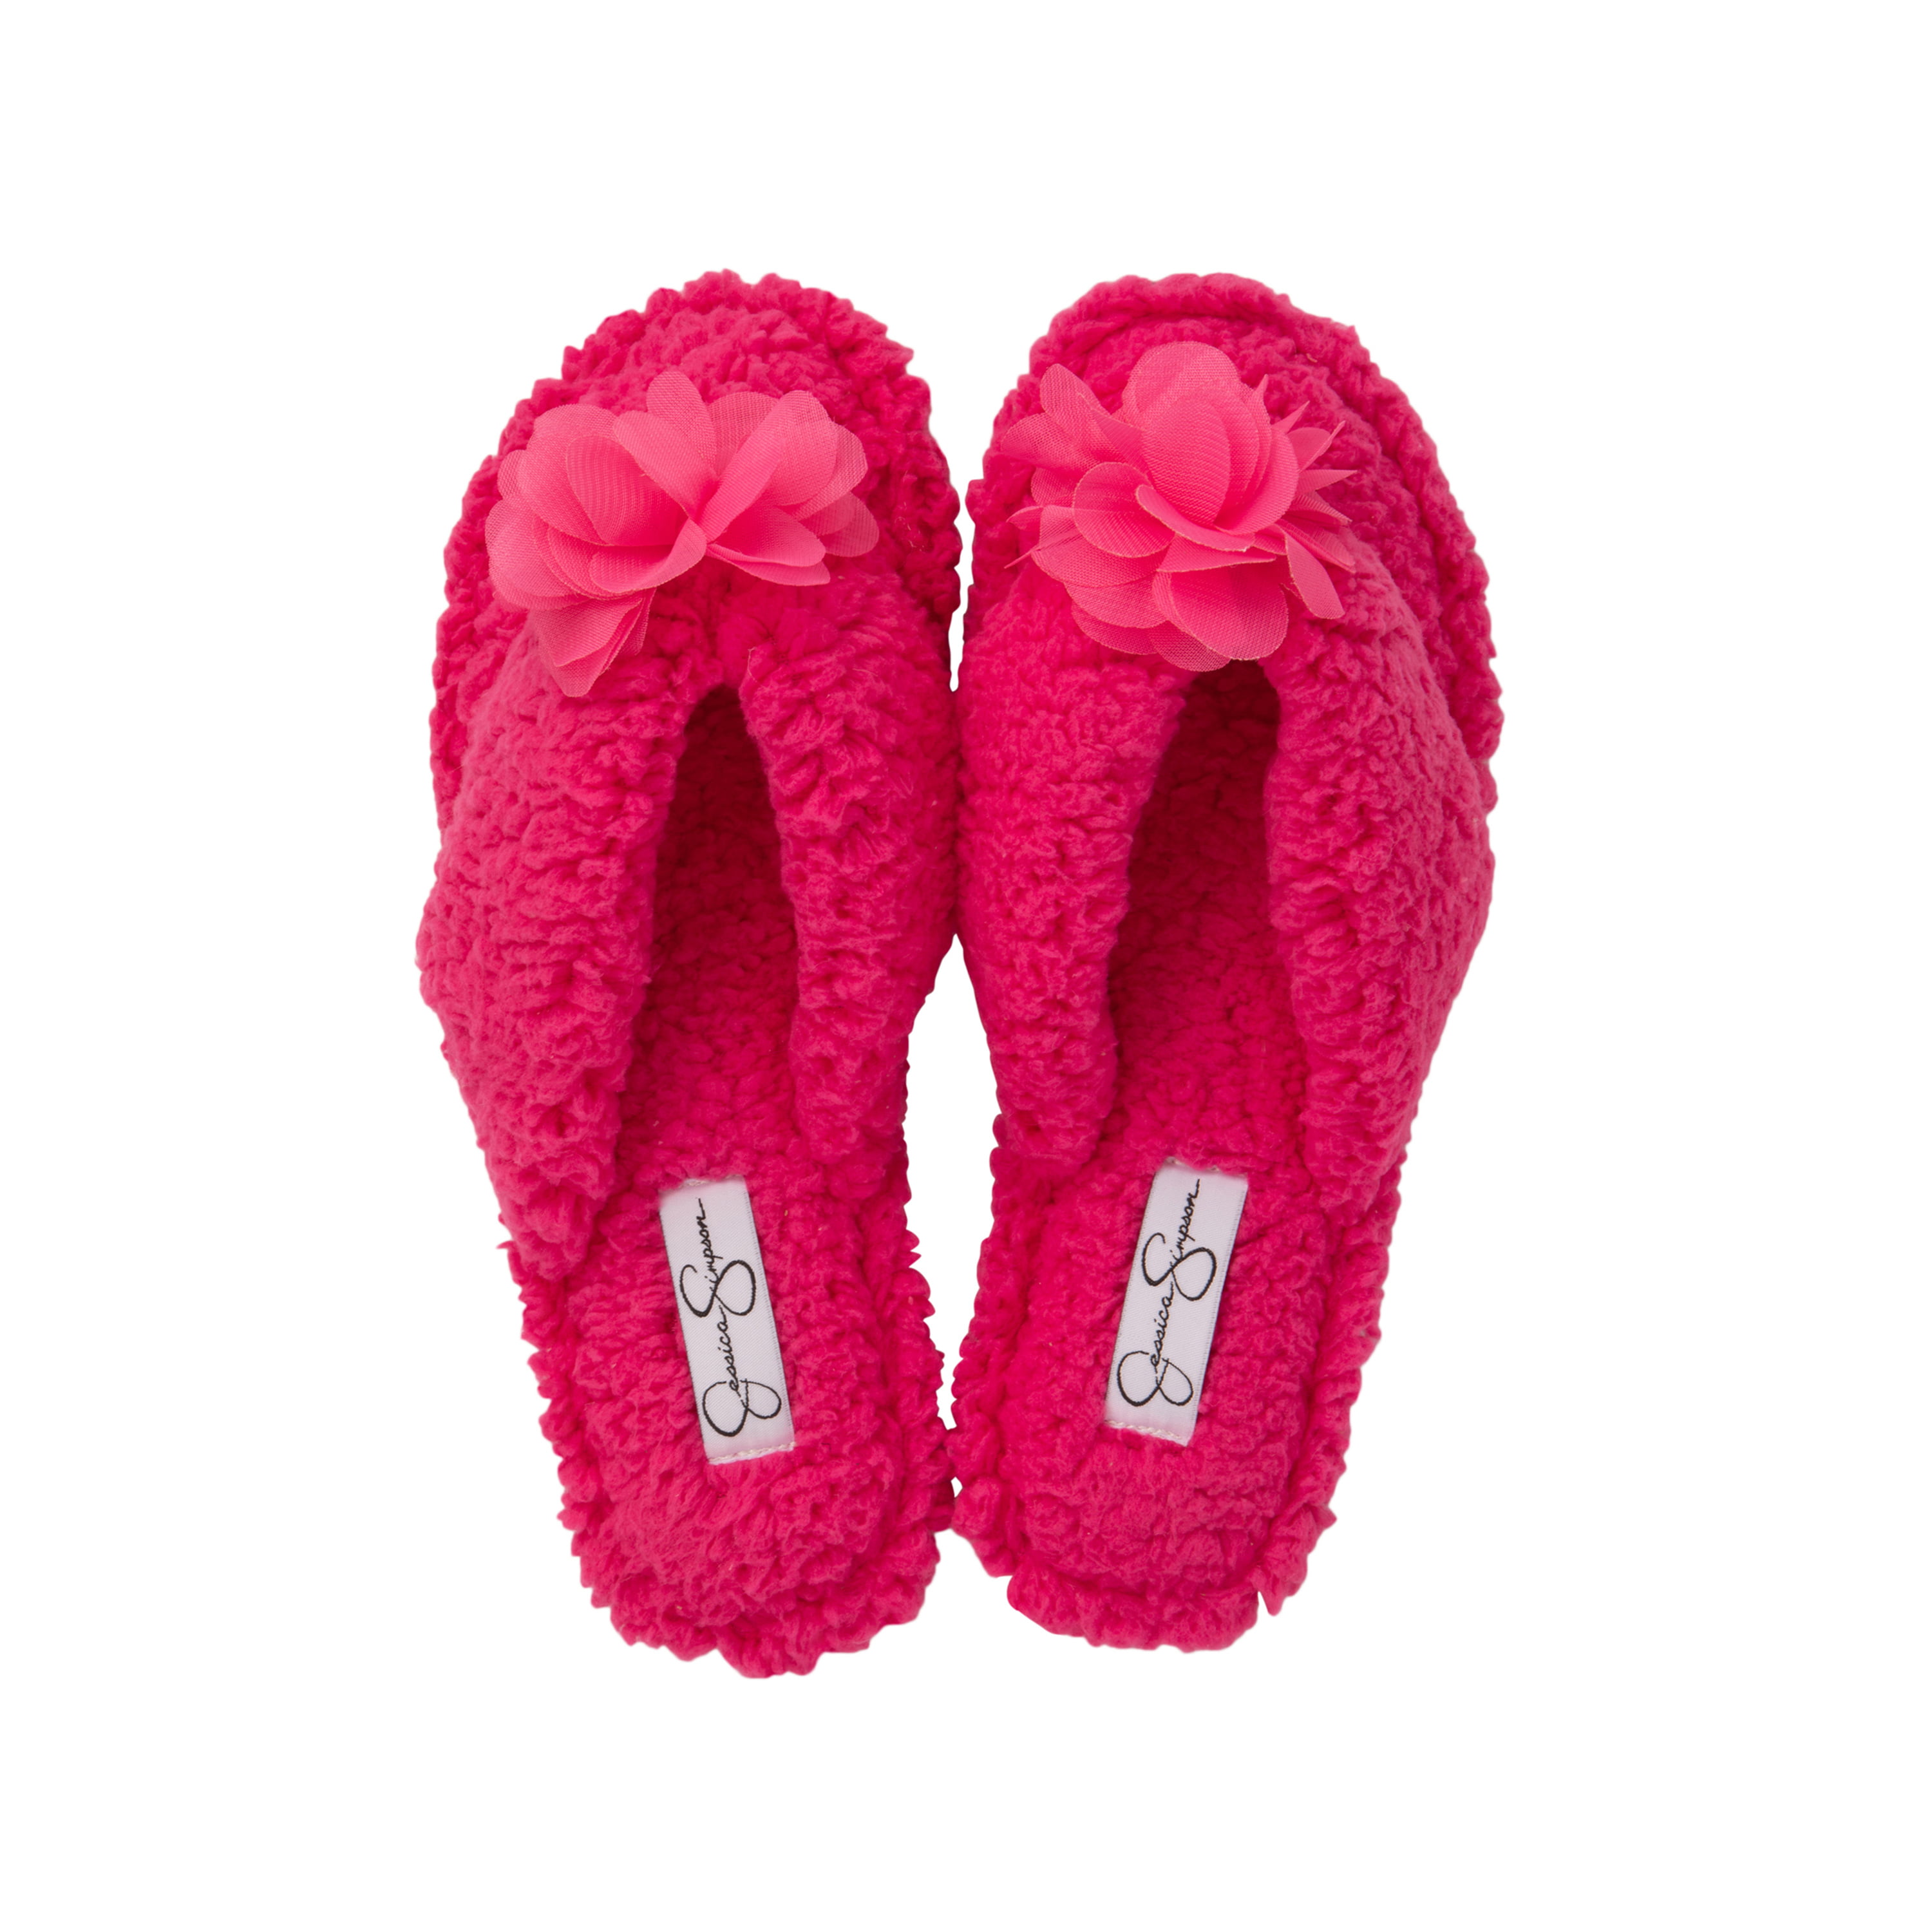 Jessica Simpson Comfort Spa Flip Flops Thong Slide On Womens Fuzzy Bedroom House Slippers 